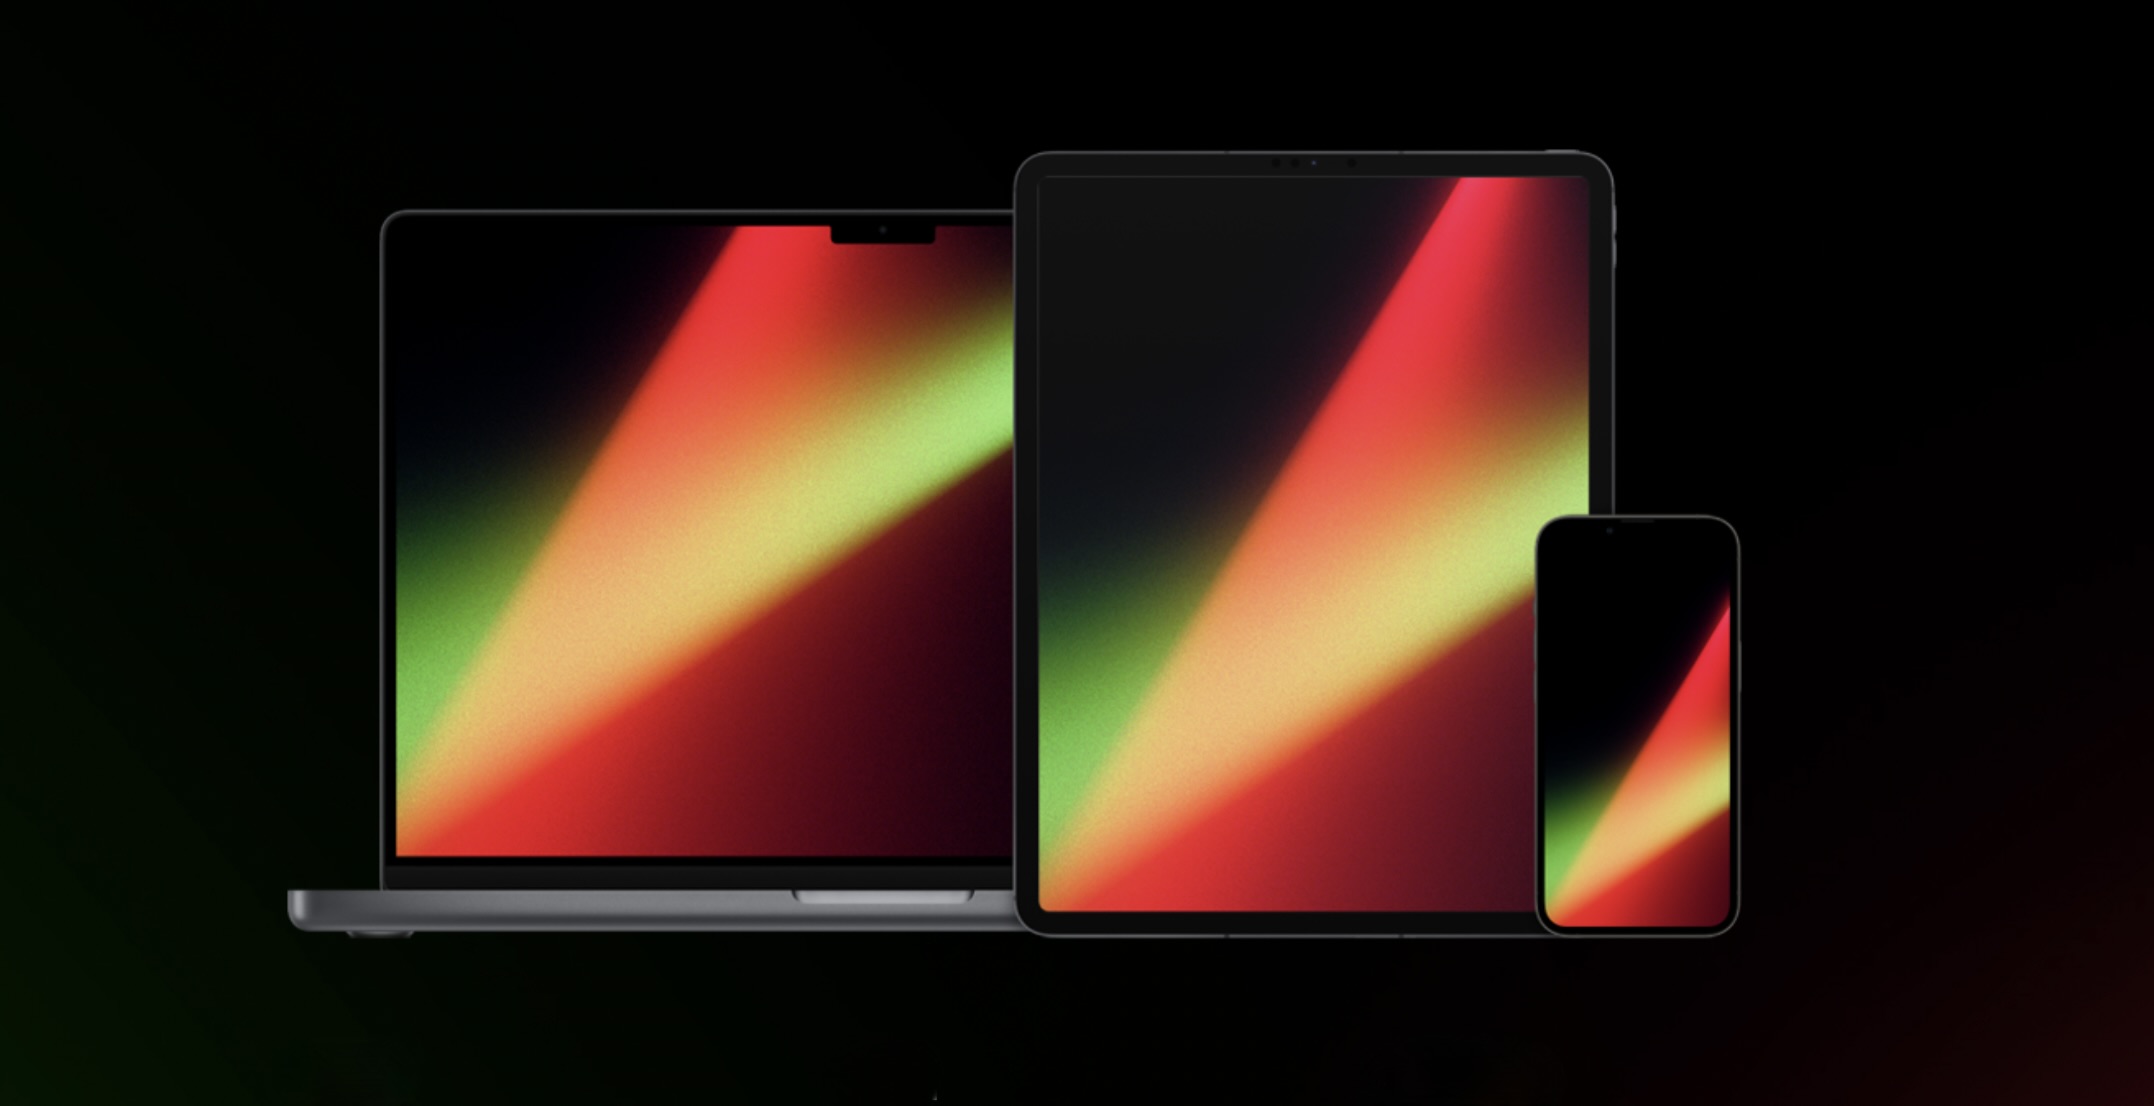 Download Apple S New Unity Lights Wallpapers For Iphone Ipad And Mac Here 9to5mac